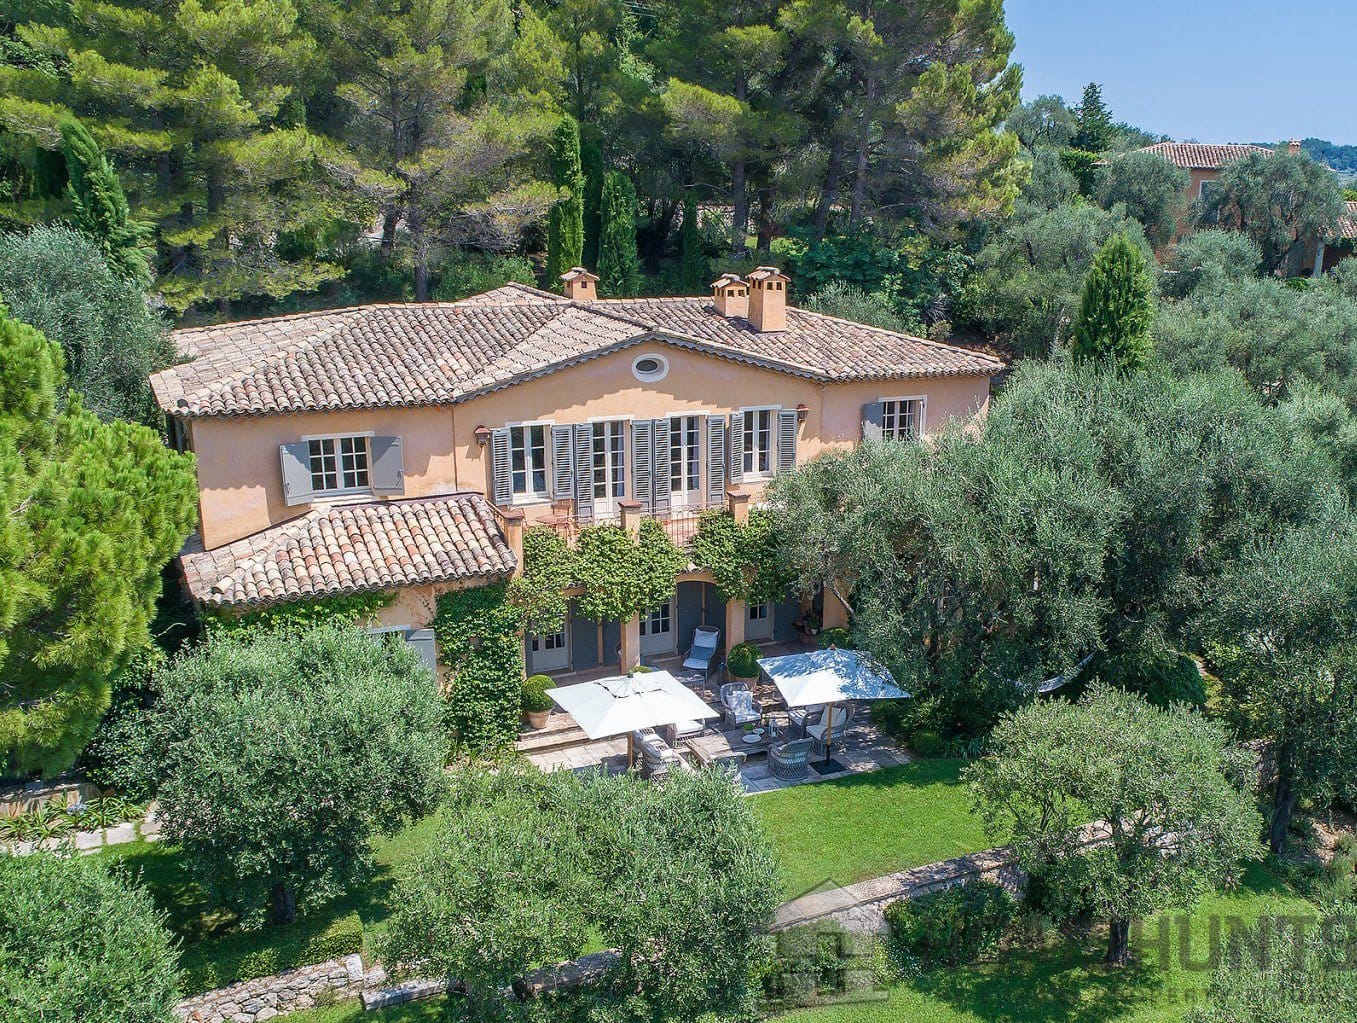 12 Bedroom Castle/Estates in Chateauneuf Grasse 10